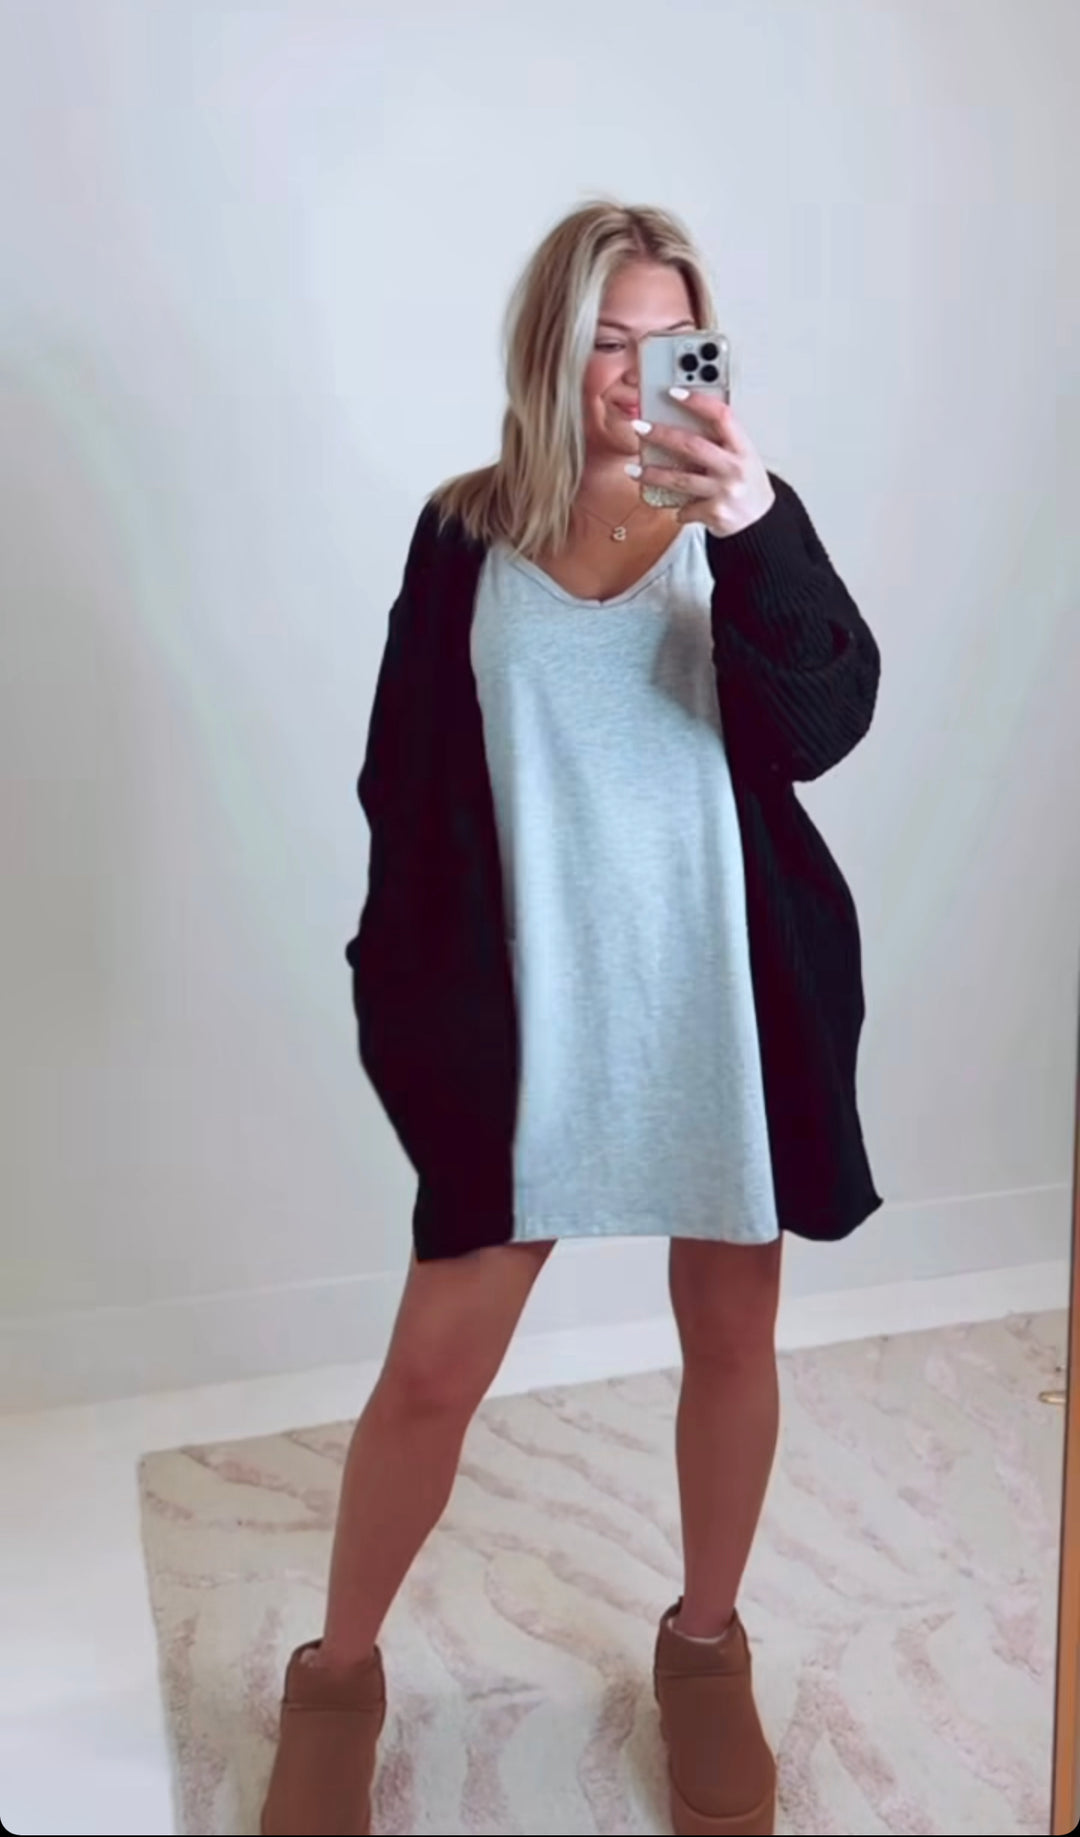 Black Cable Knit Open Front Long Cardigan